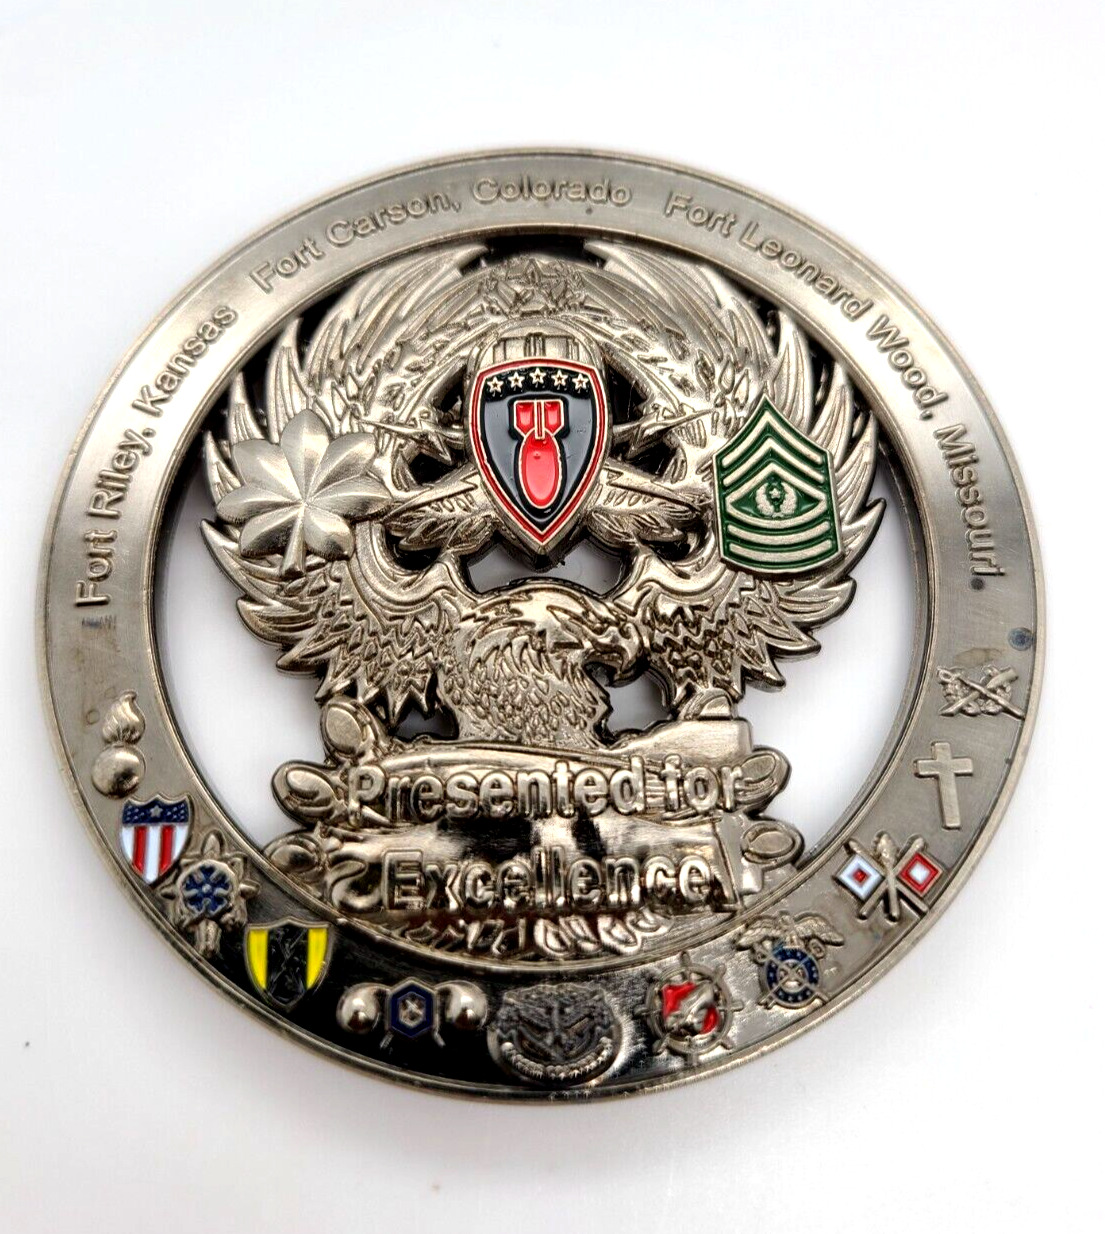 774th EOD CO 764th EOD CO 749th EOD CO Army Presented For Excellence Coin Medal